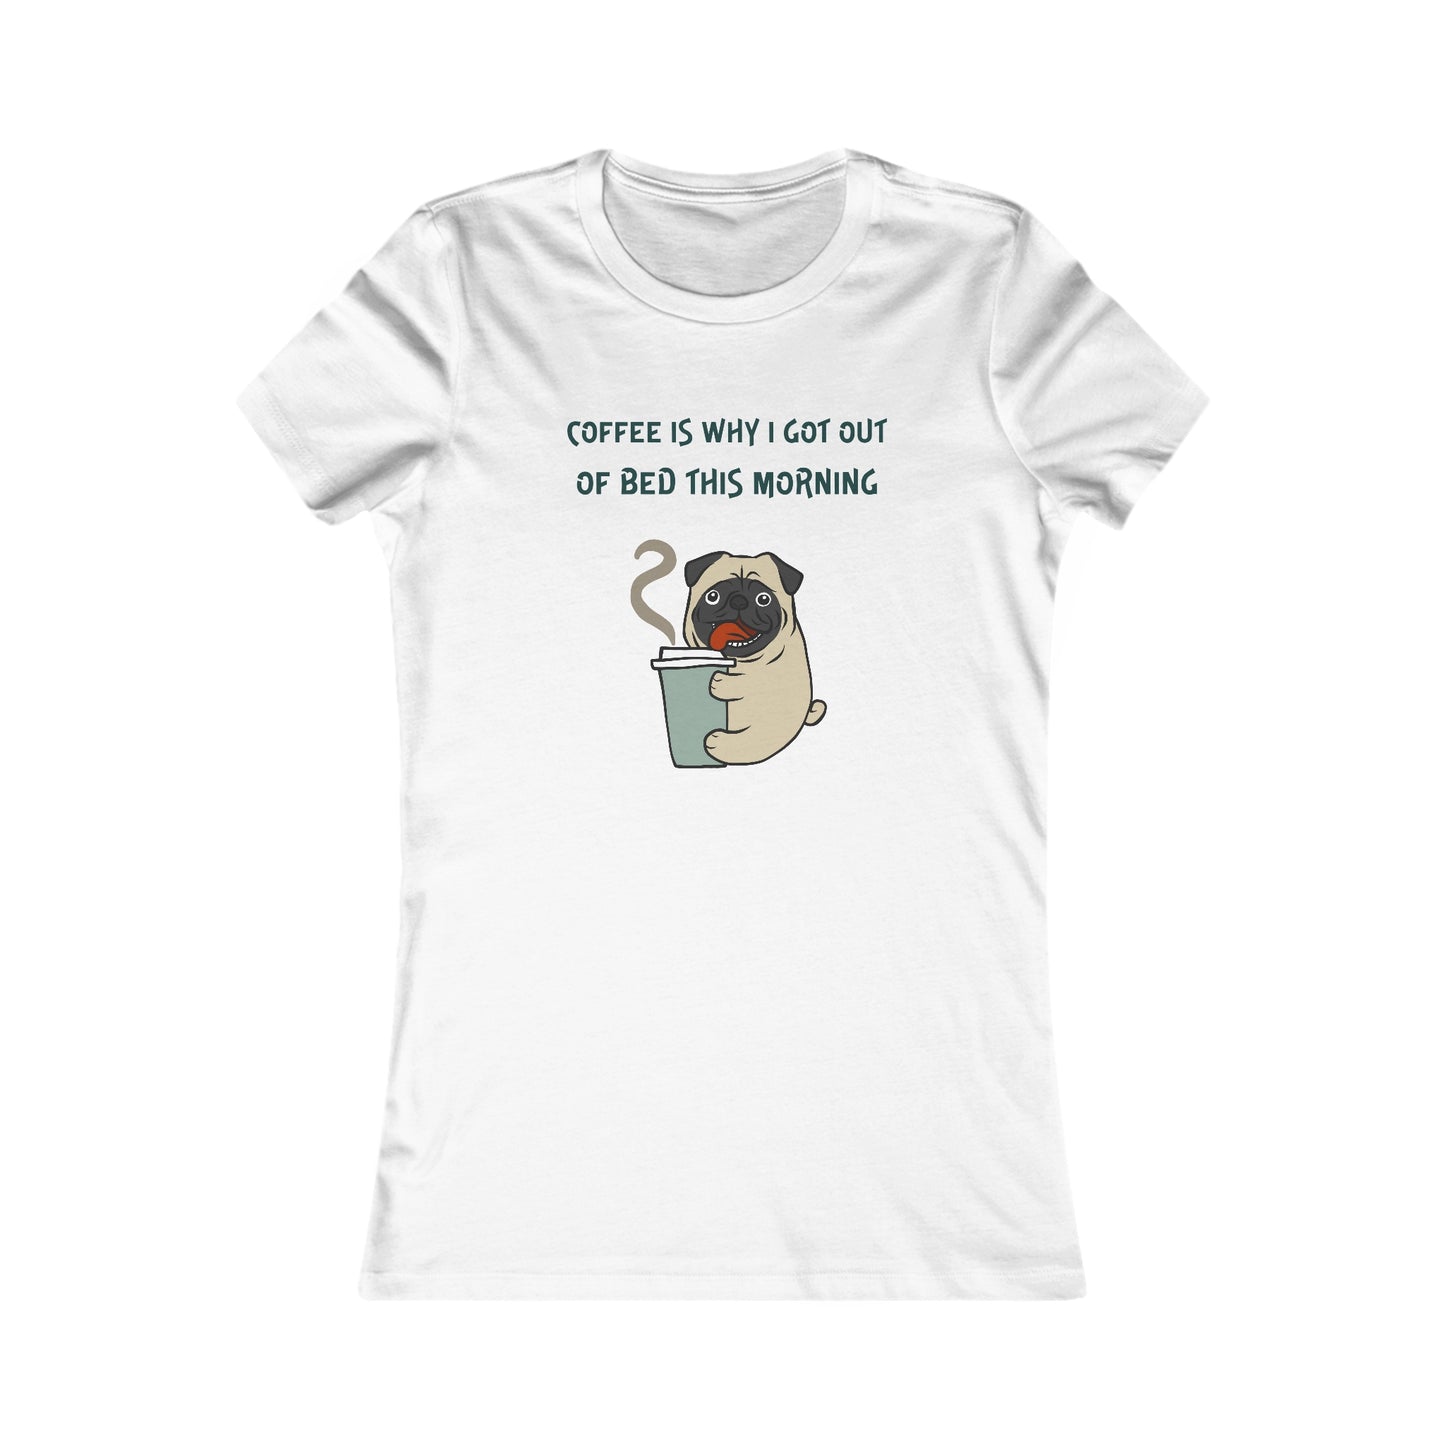 Pete The Bull Dog. Coffee Is Why I Got Out of Bed This Morning. Women's Favorite Tee